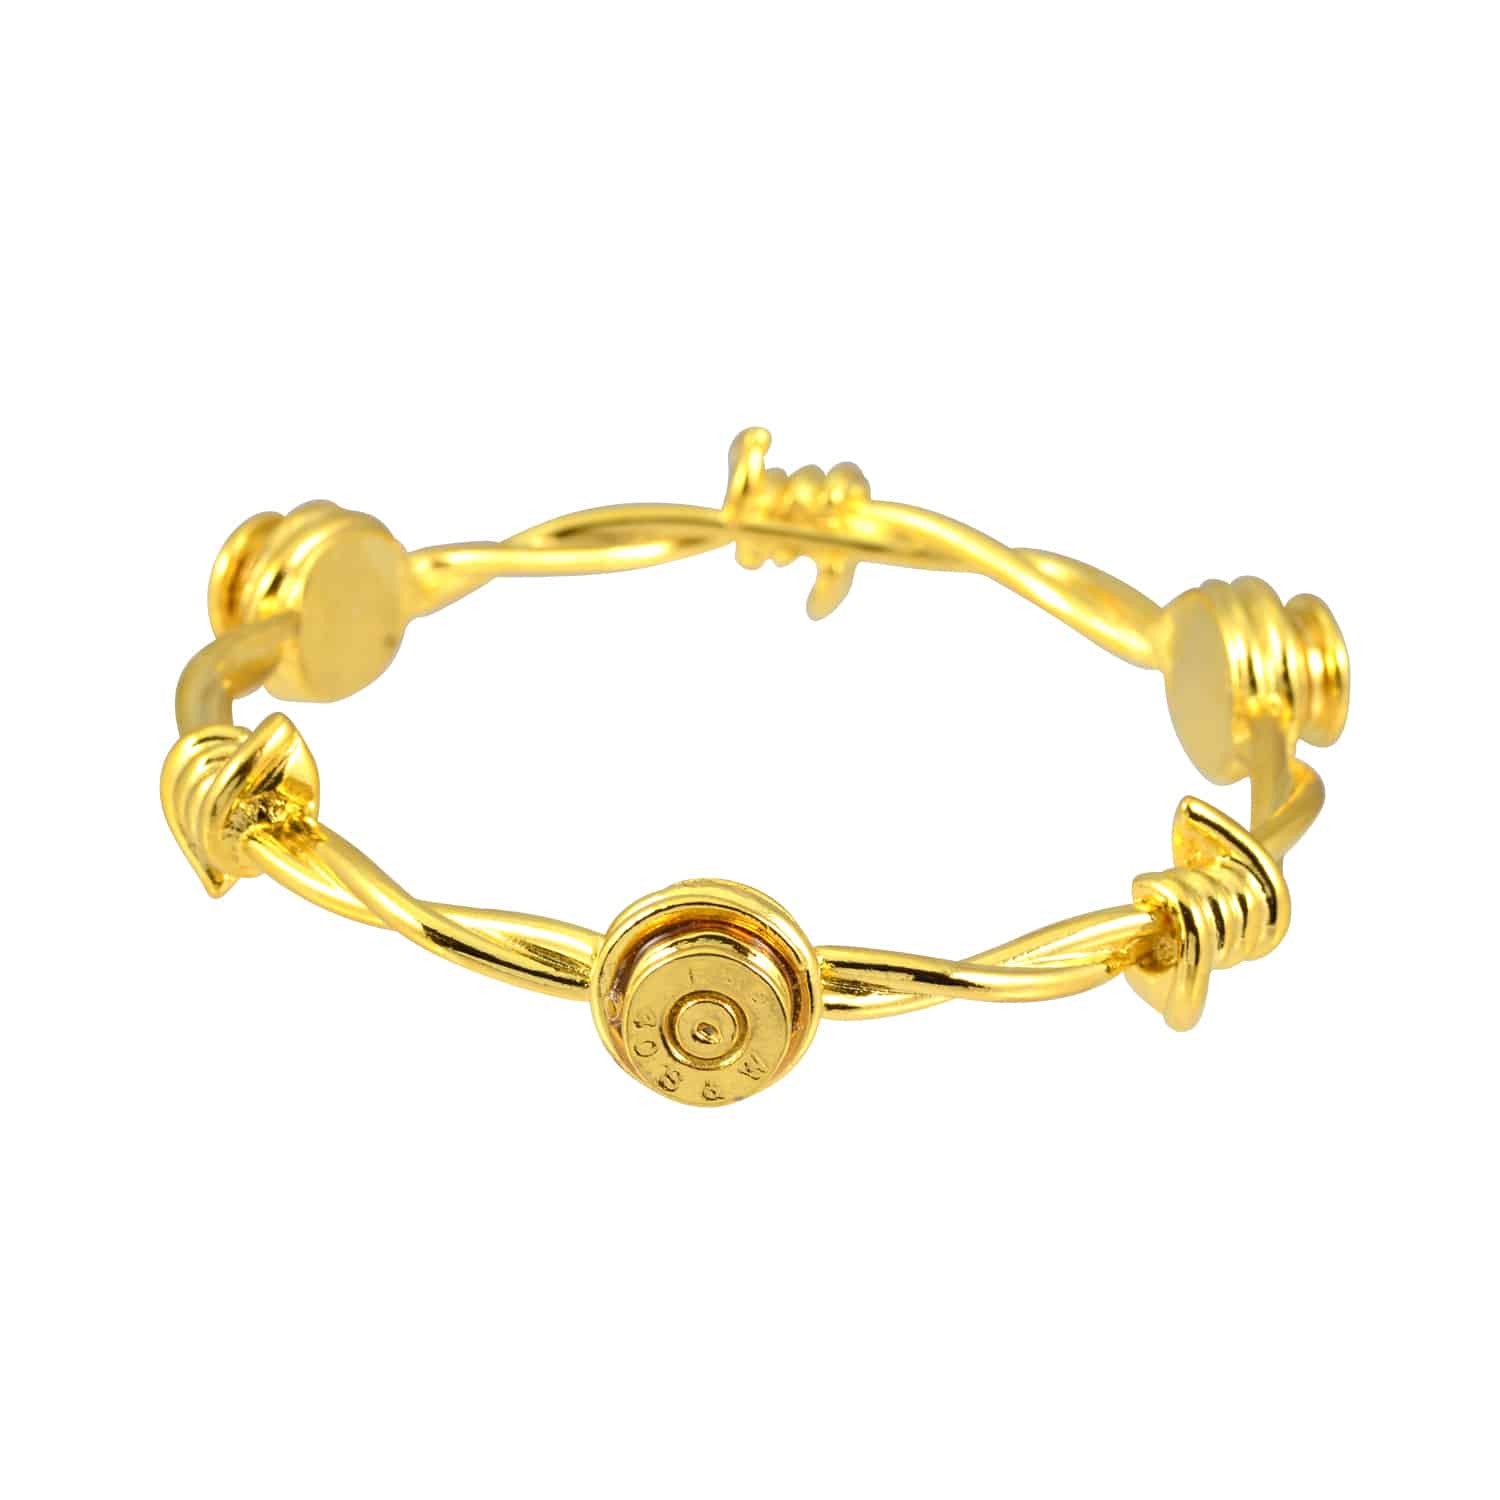 Lizzy Js Barbed Wire Bullet Shell Cuff Bracelet, Gold Plated Round